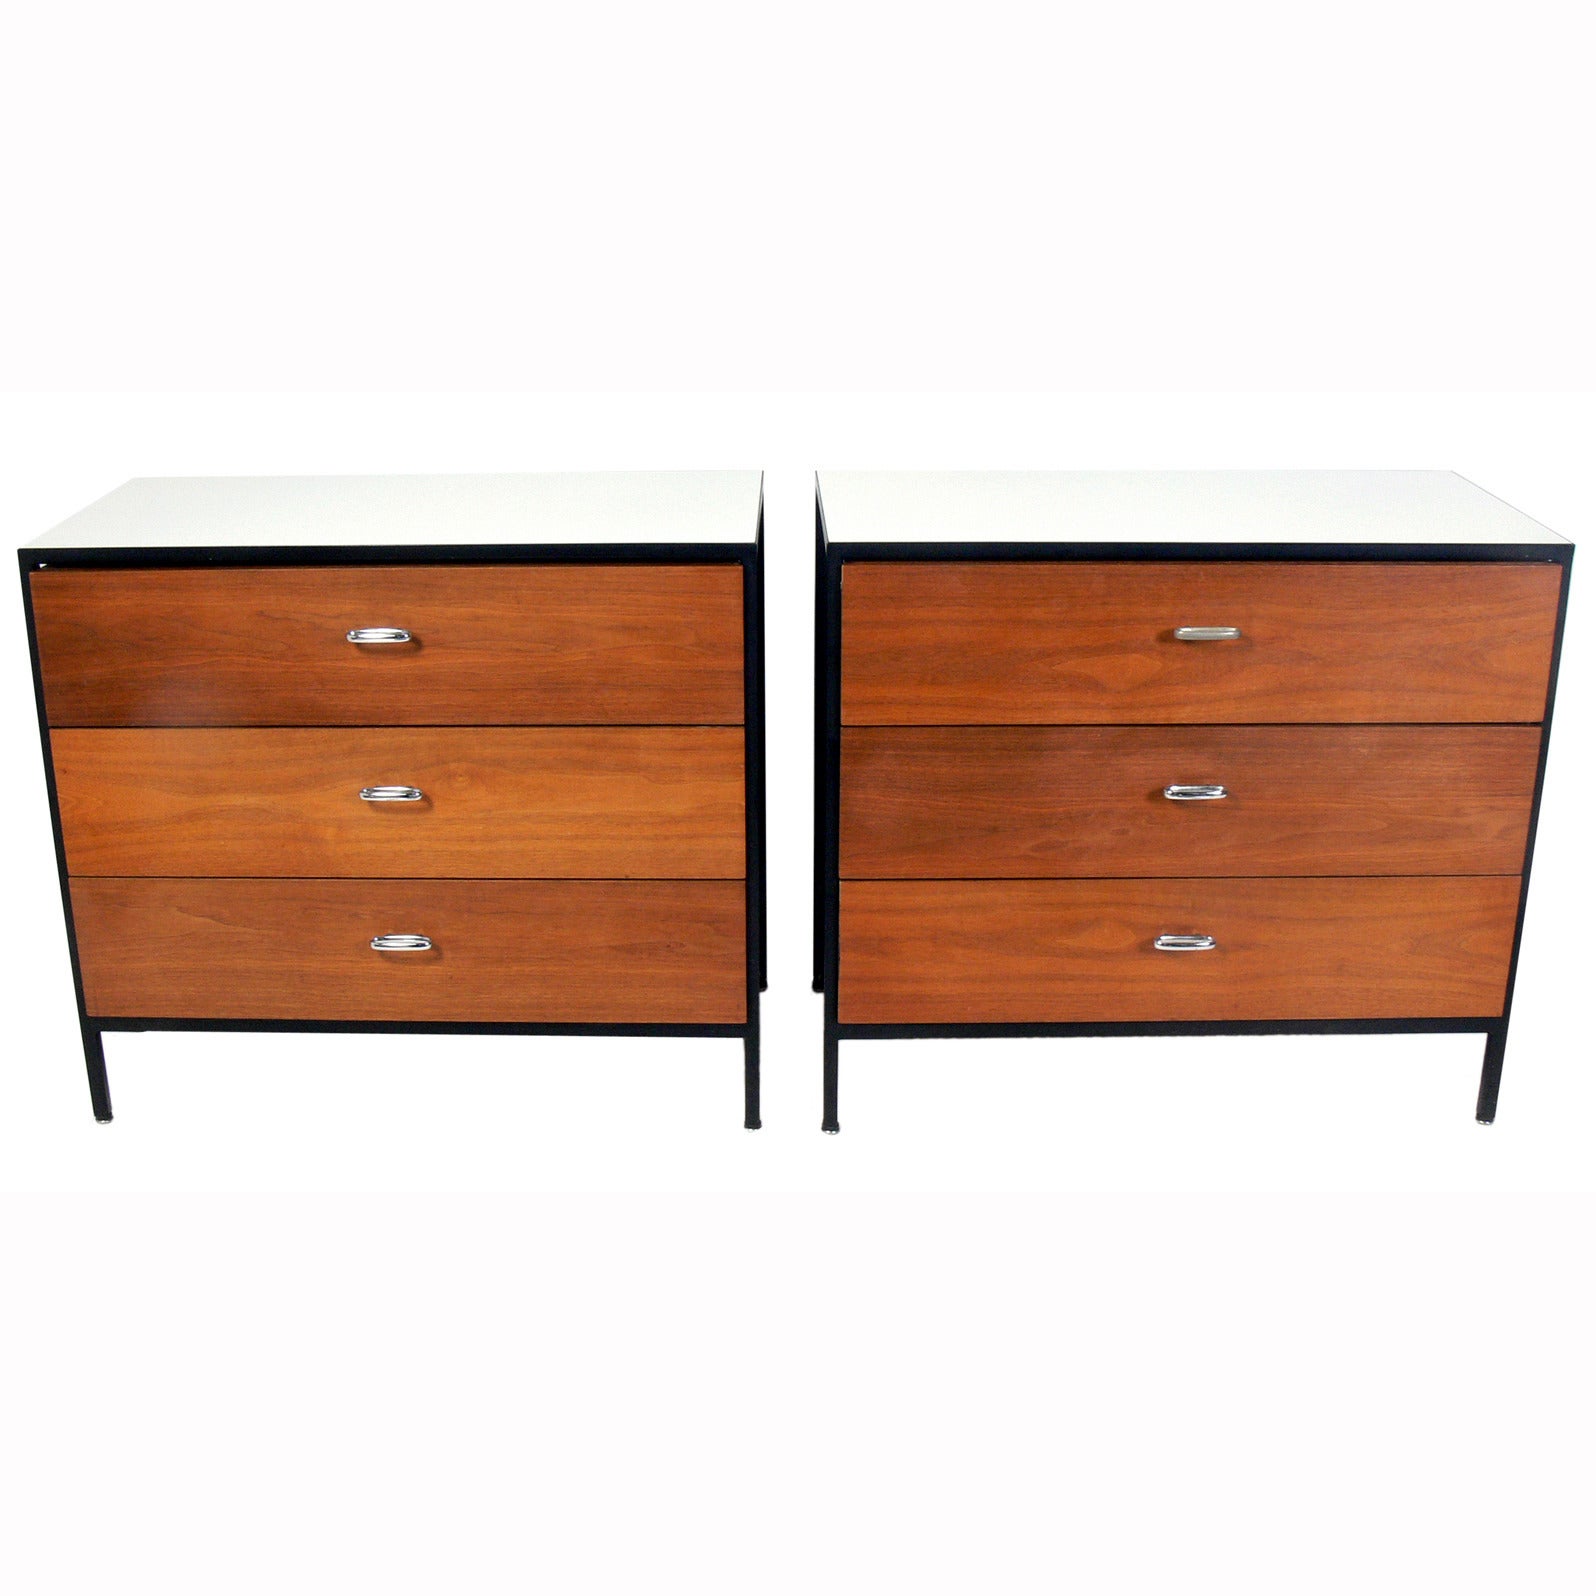 Pair of Modern Chests Designed by George Nelson for Herman Miller